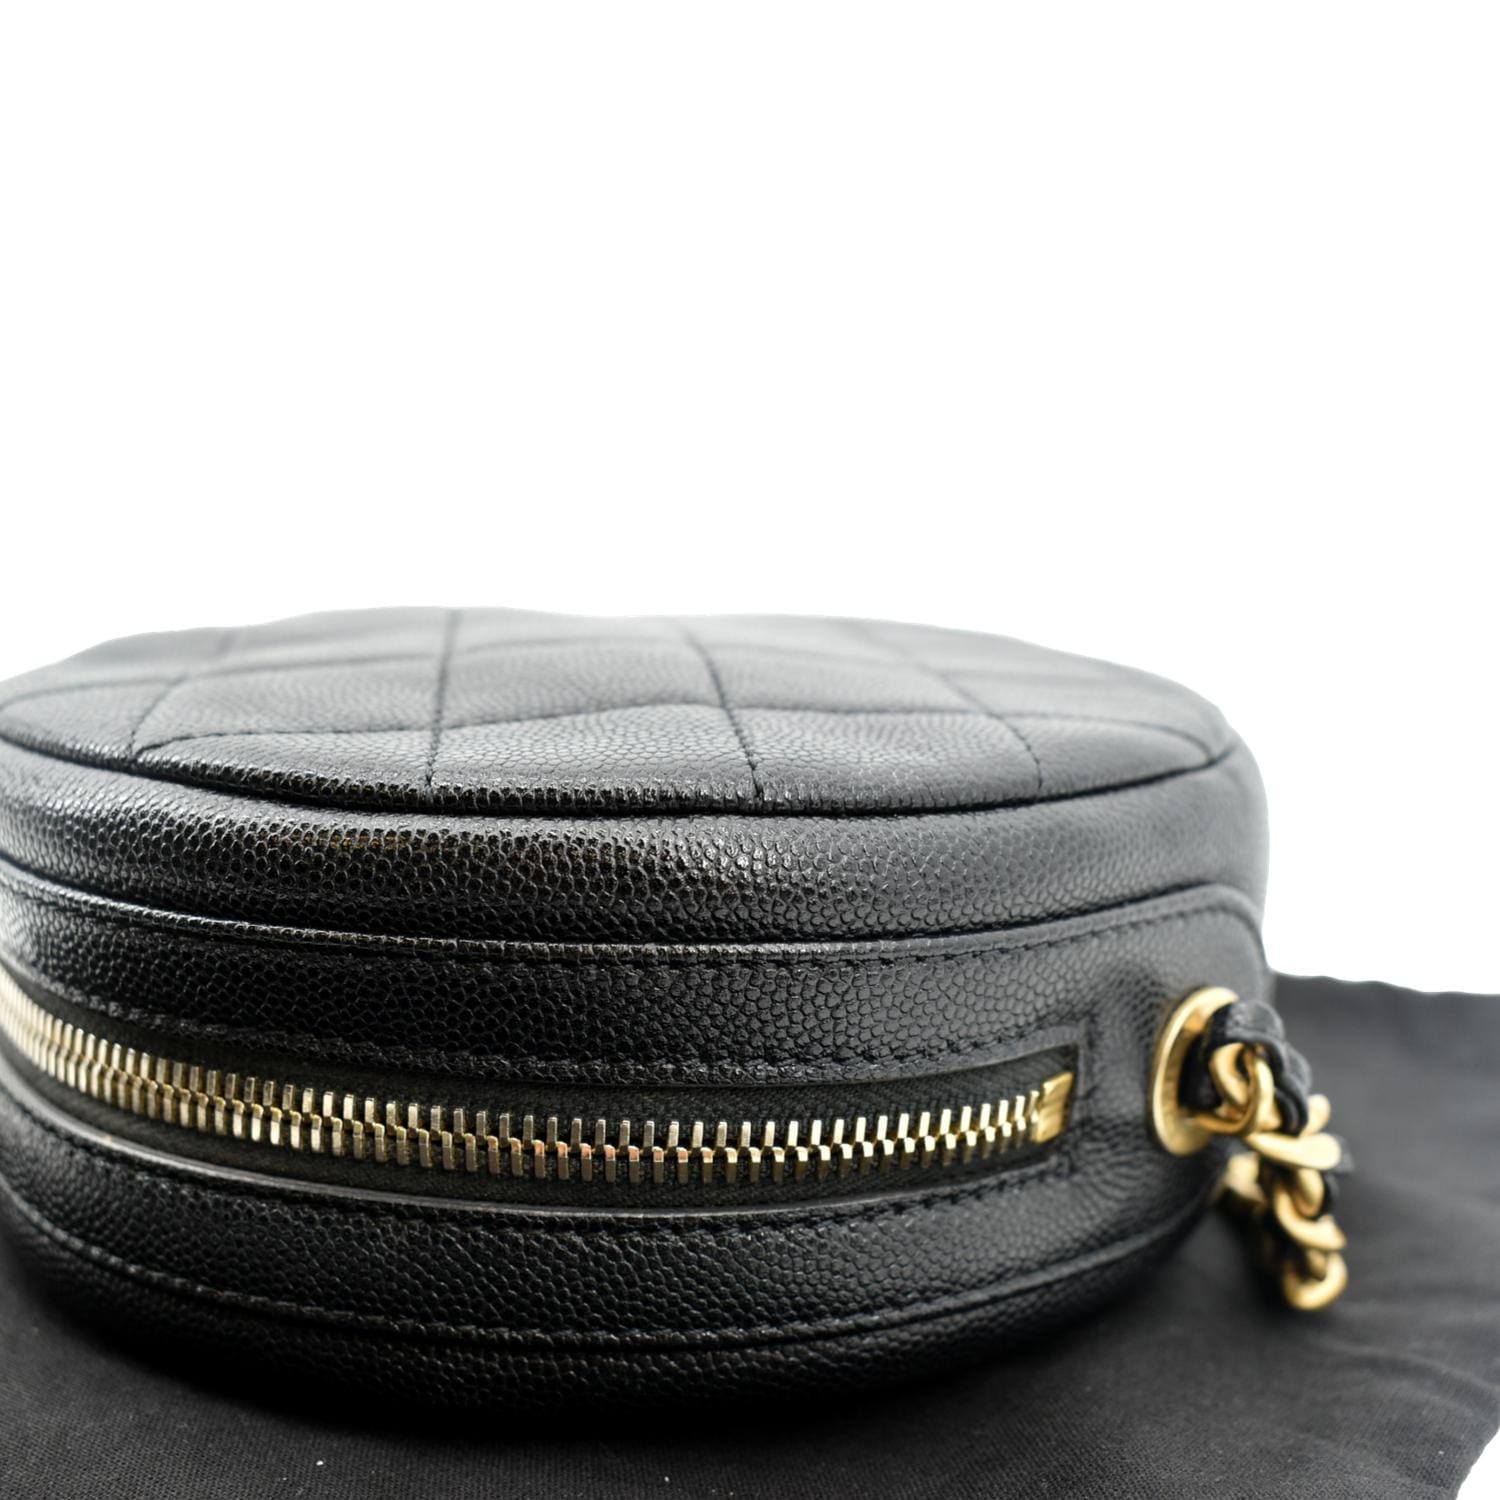 Leather Clutch 